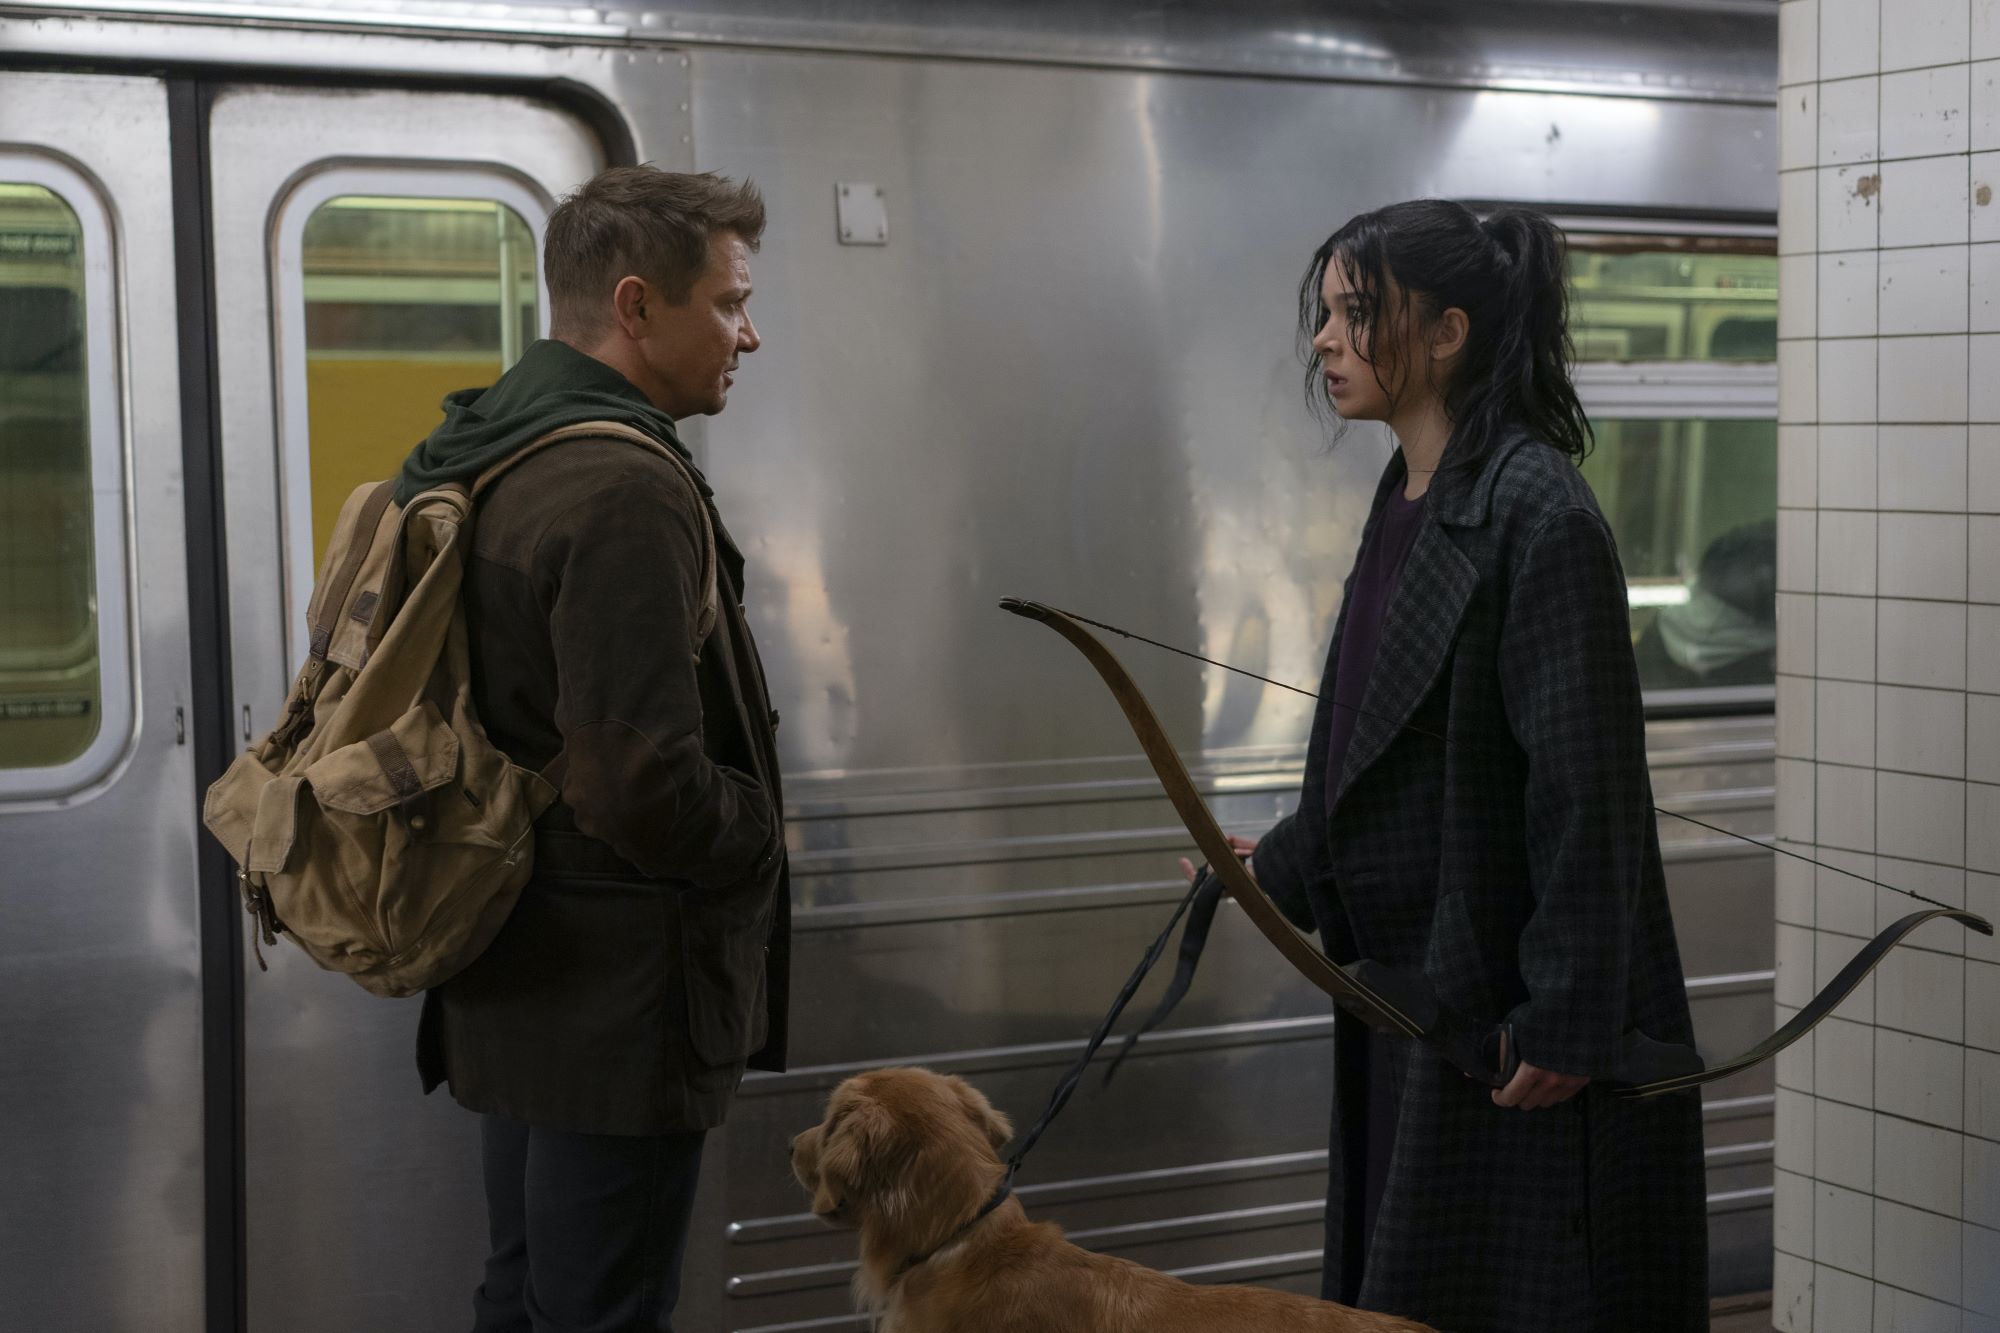 'Hawkeye' stars Jeremy Renner and Hailee Steinfeld, in character as Clint Barton and Kate Bishop, stand in a subway station as a train passes by. Clint wears a brown jacket over a green hoodie and has a tan backpack on his back. Kate wears a long dark plaid jacket over a purple shirt and is holding onto a bow in one hand and the leash that is attached to her dog in the other.